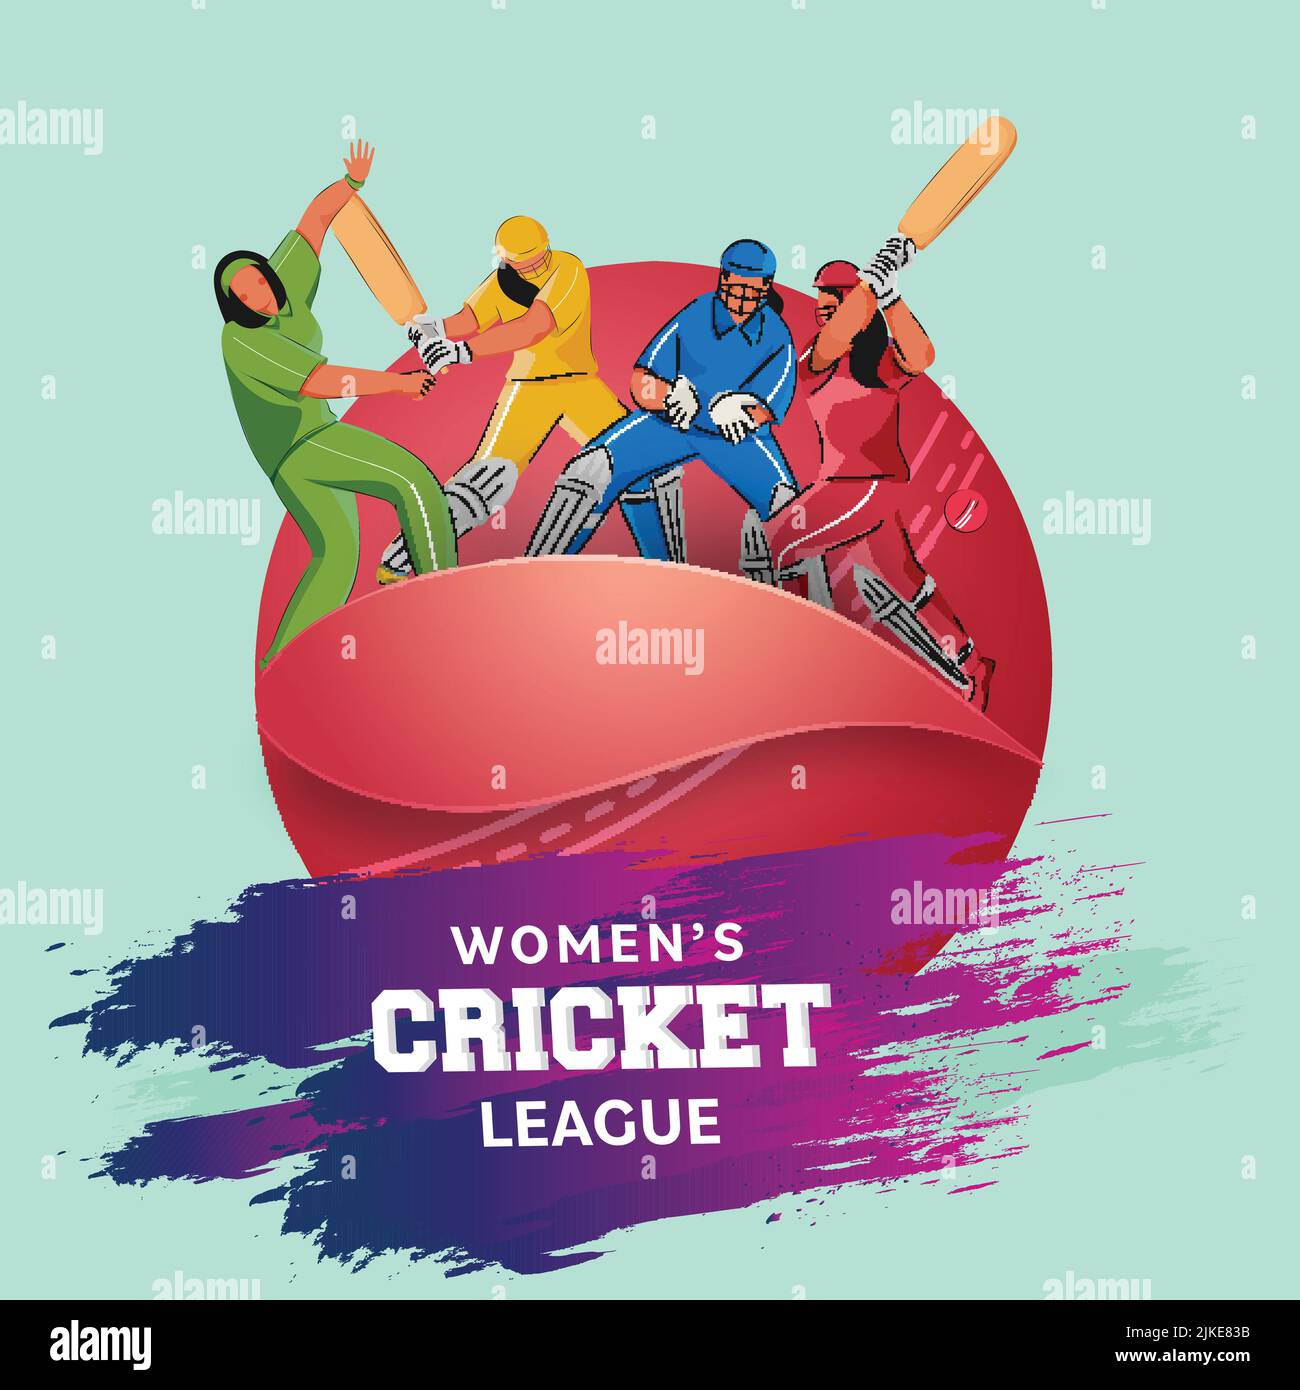 Women's Cricket League Concept With Five Countries Female Players In Different Poses And Purple Brush Effect On Red And Aqua Background. Stock Vector